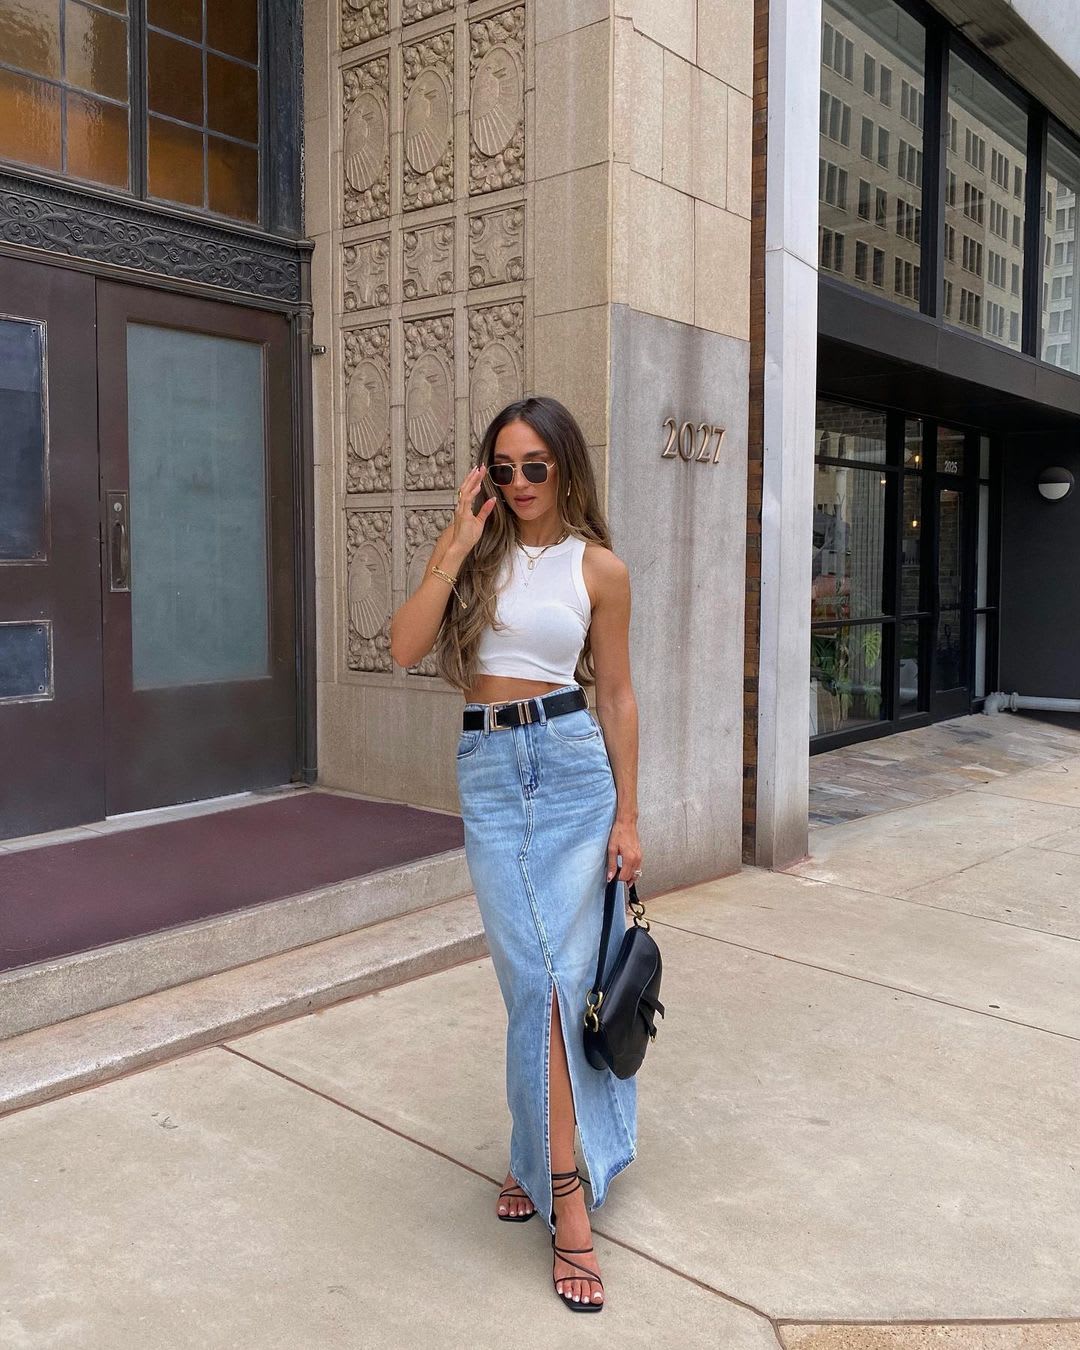 24 Crocs Outfit Ideas That Are Both Stylish and Comfy - PureWow